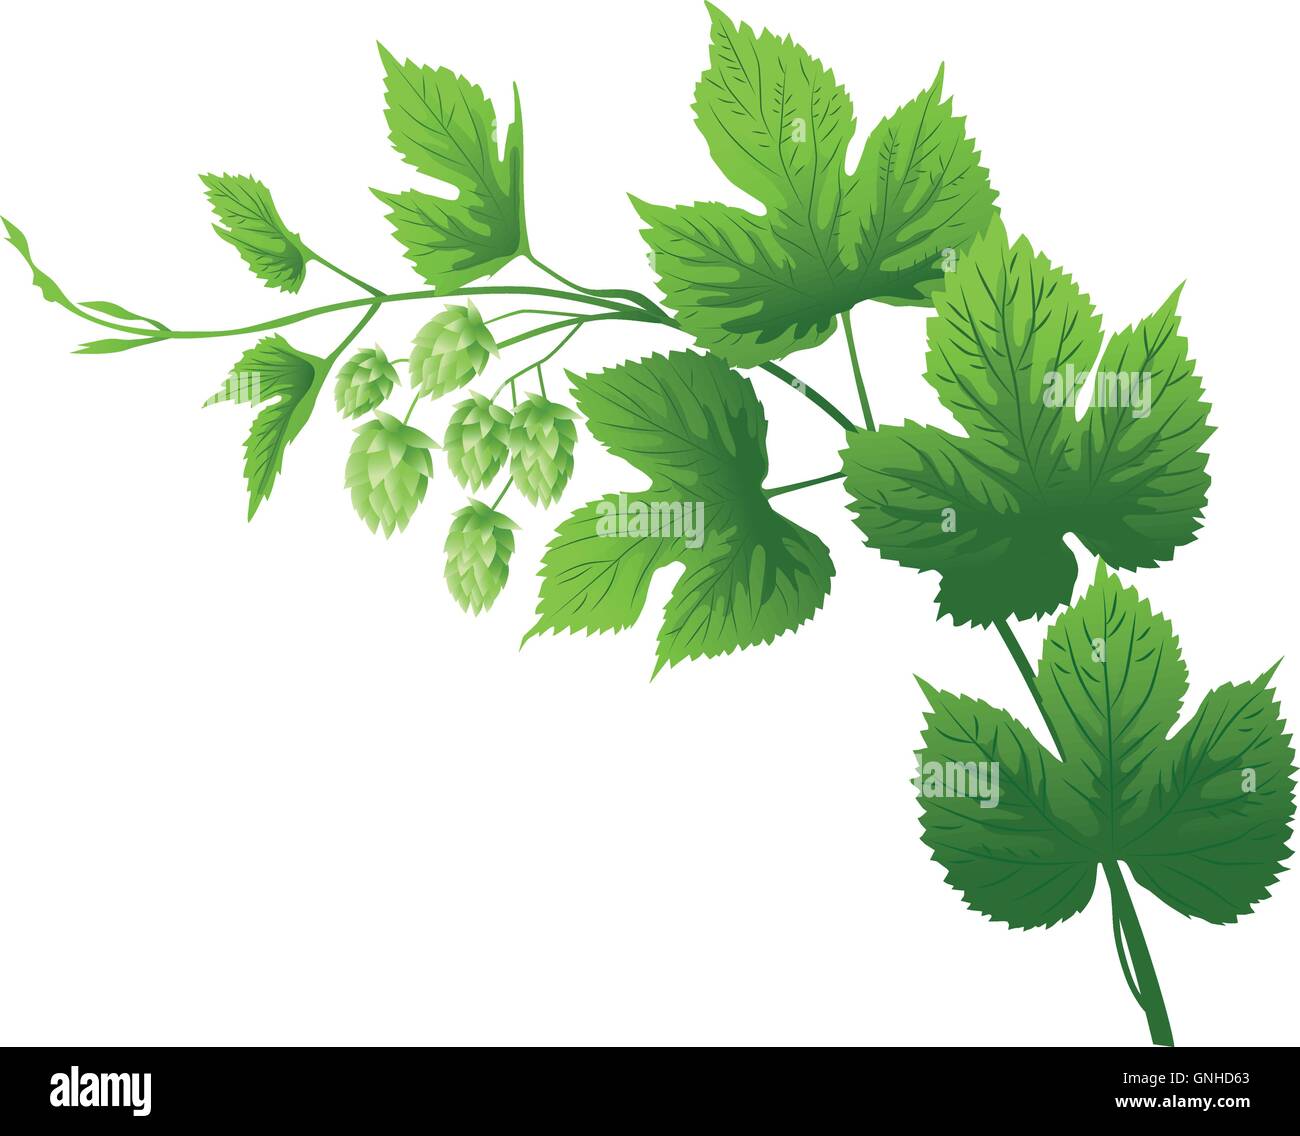 Hop branch with leaves and flowers vector illustration Stock Vector